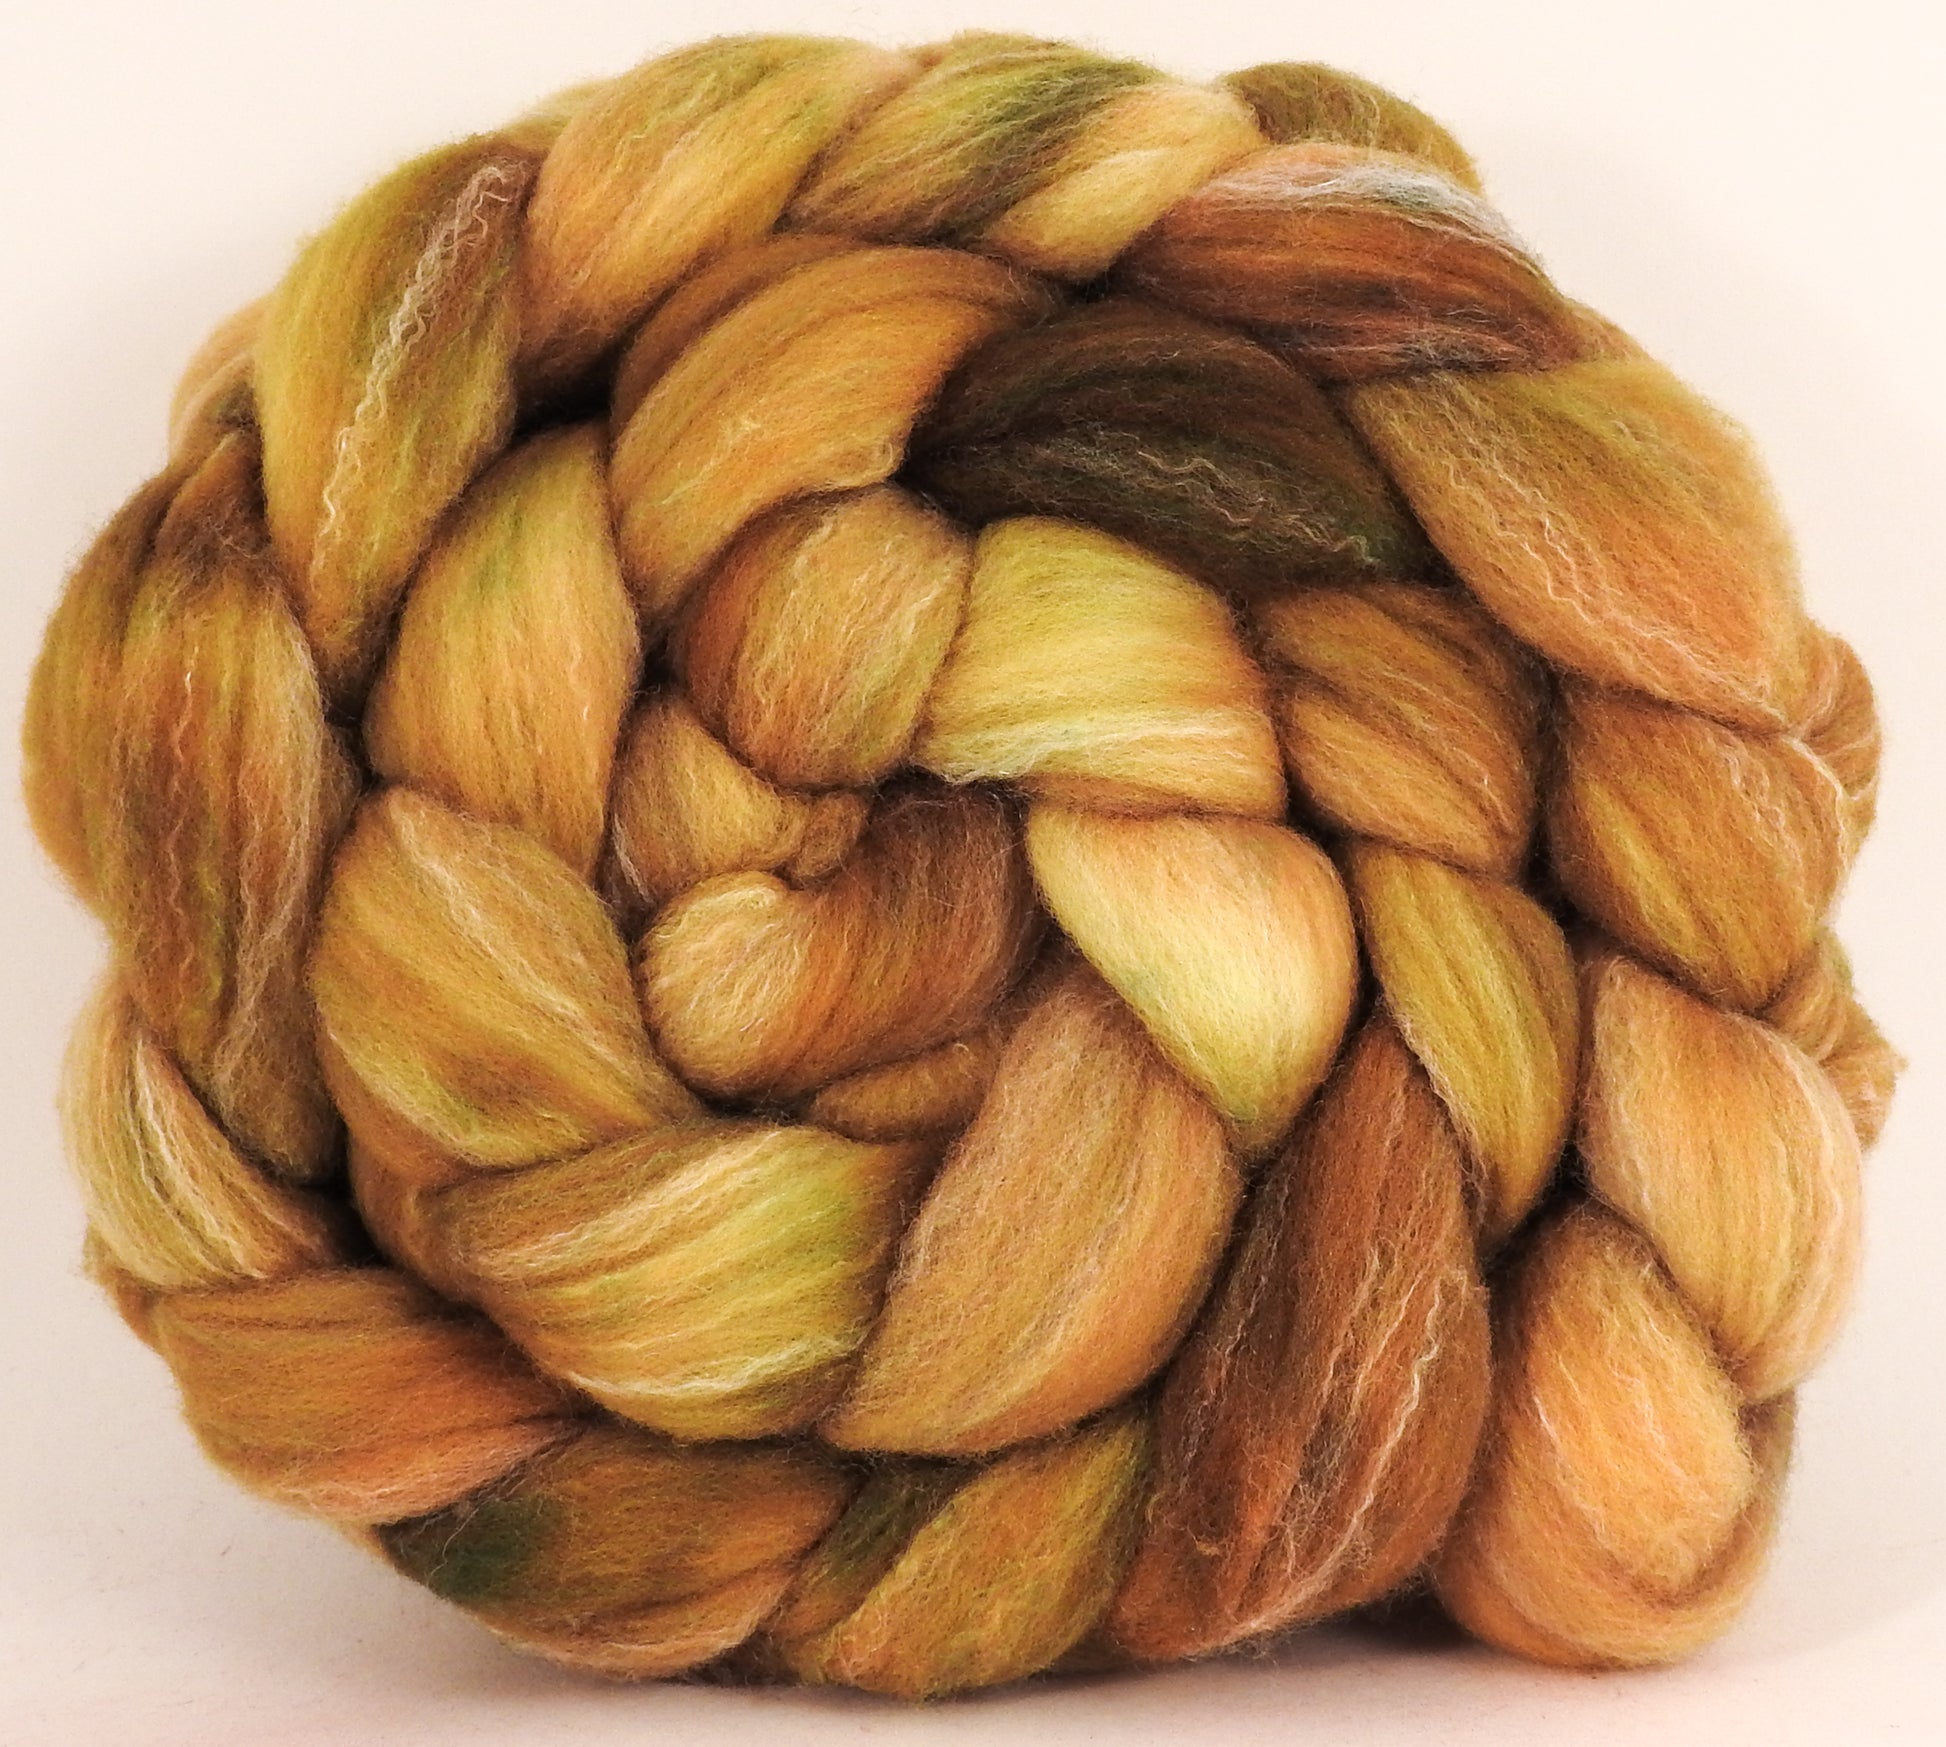 Hand dyed top for spinning -Old Gold - (5.4 oz.) Targhee/silk/ bamboo (80/10/10) - Inglenook Fibers